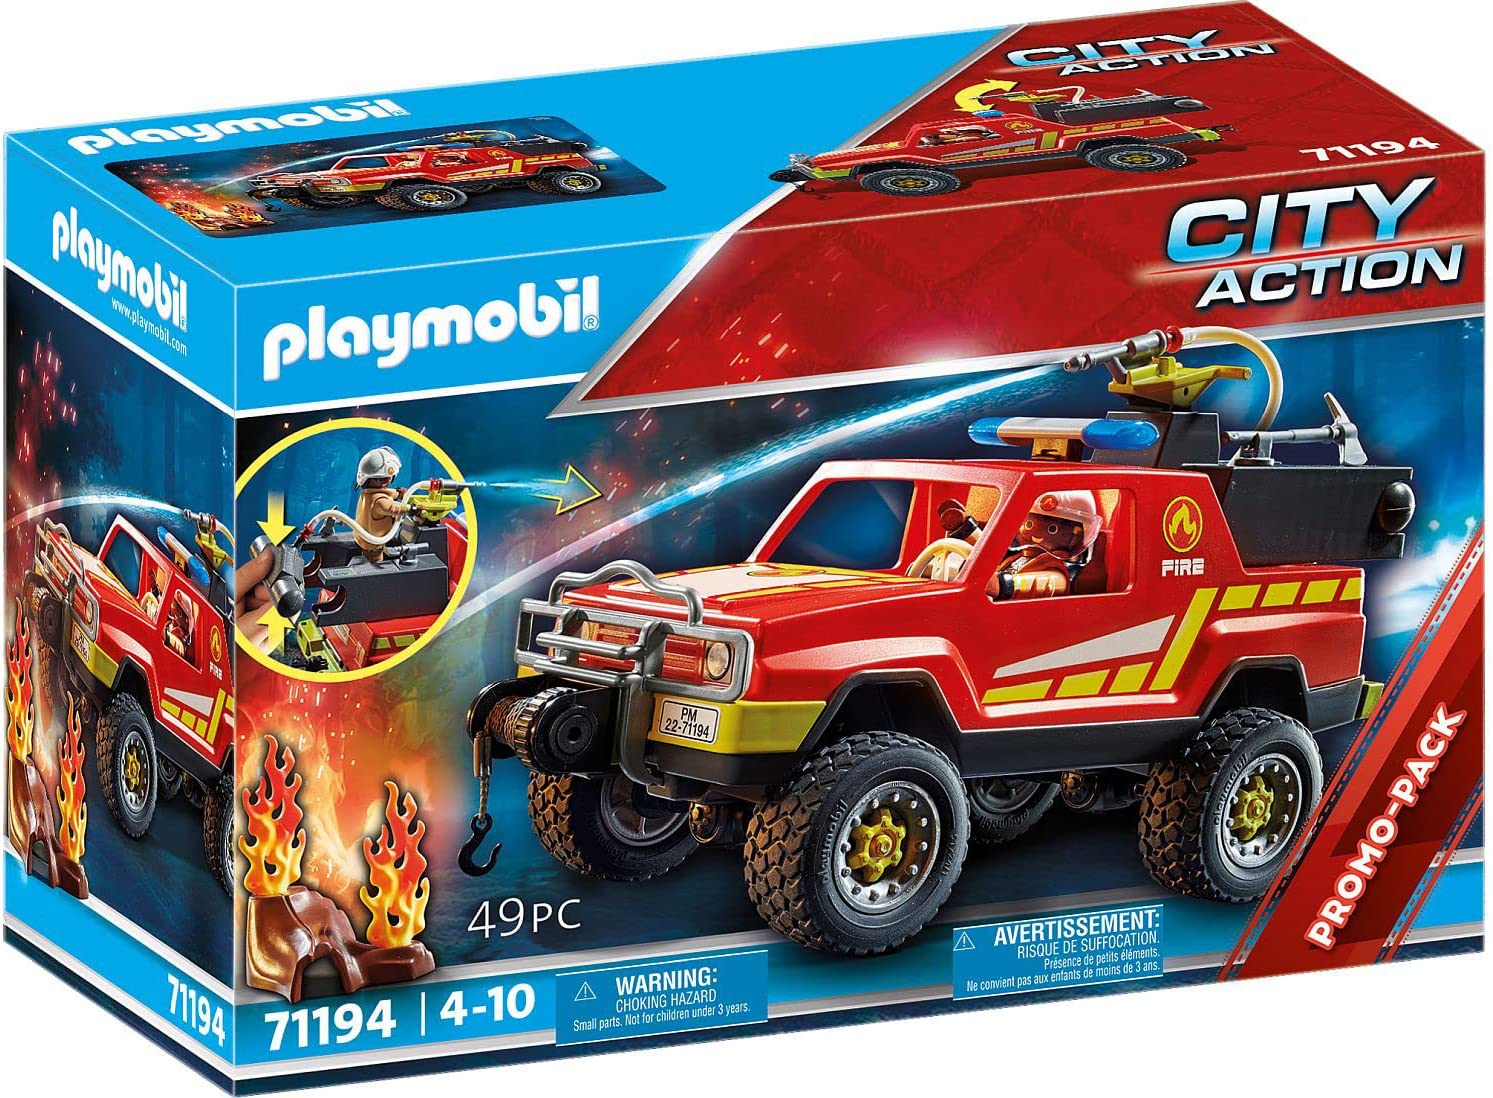 PLAYMOBIL City Action 71194 Fire Engine Fire Truck, Fire Engine Car with Spray Function, Toy for Children from 4 Years